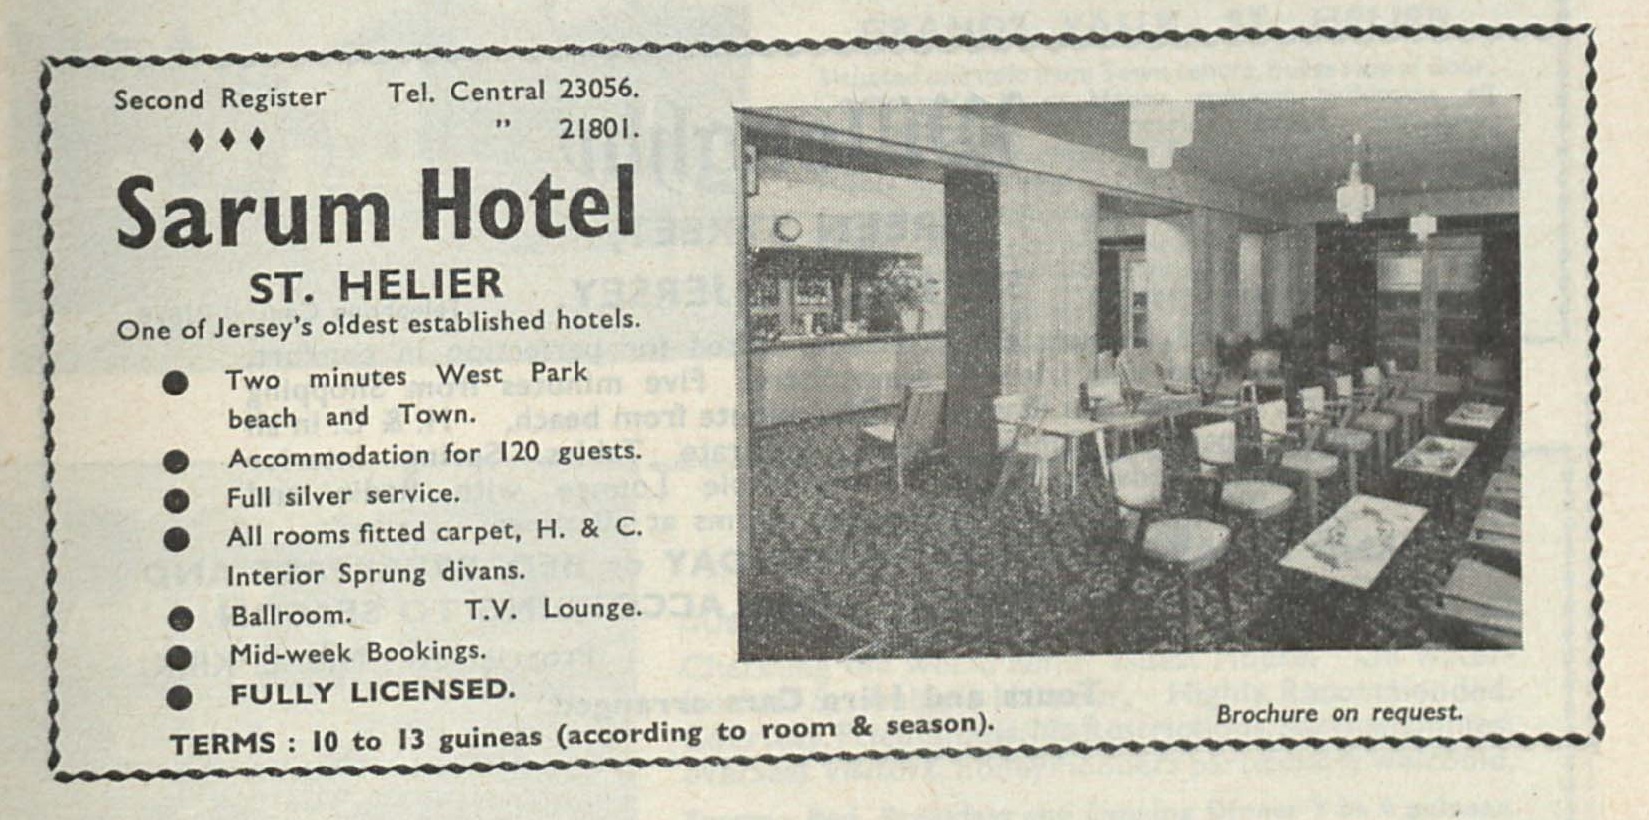 Advertisment_for_the_Sarum_Hotel_from_a_tourism_brochure_in_the_1960s_Jersey_Heritage.jpg